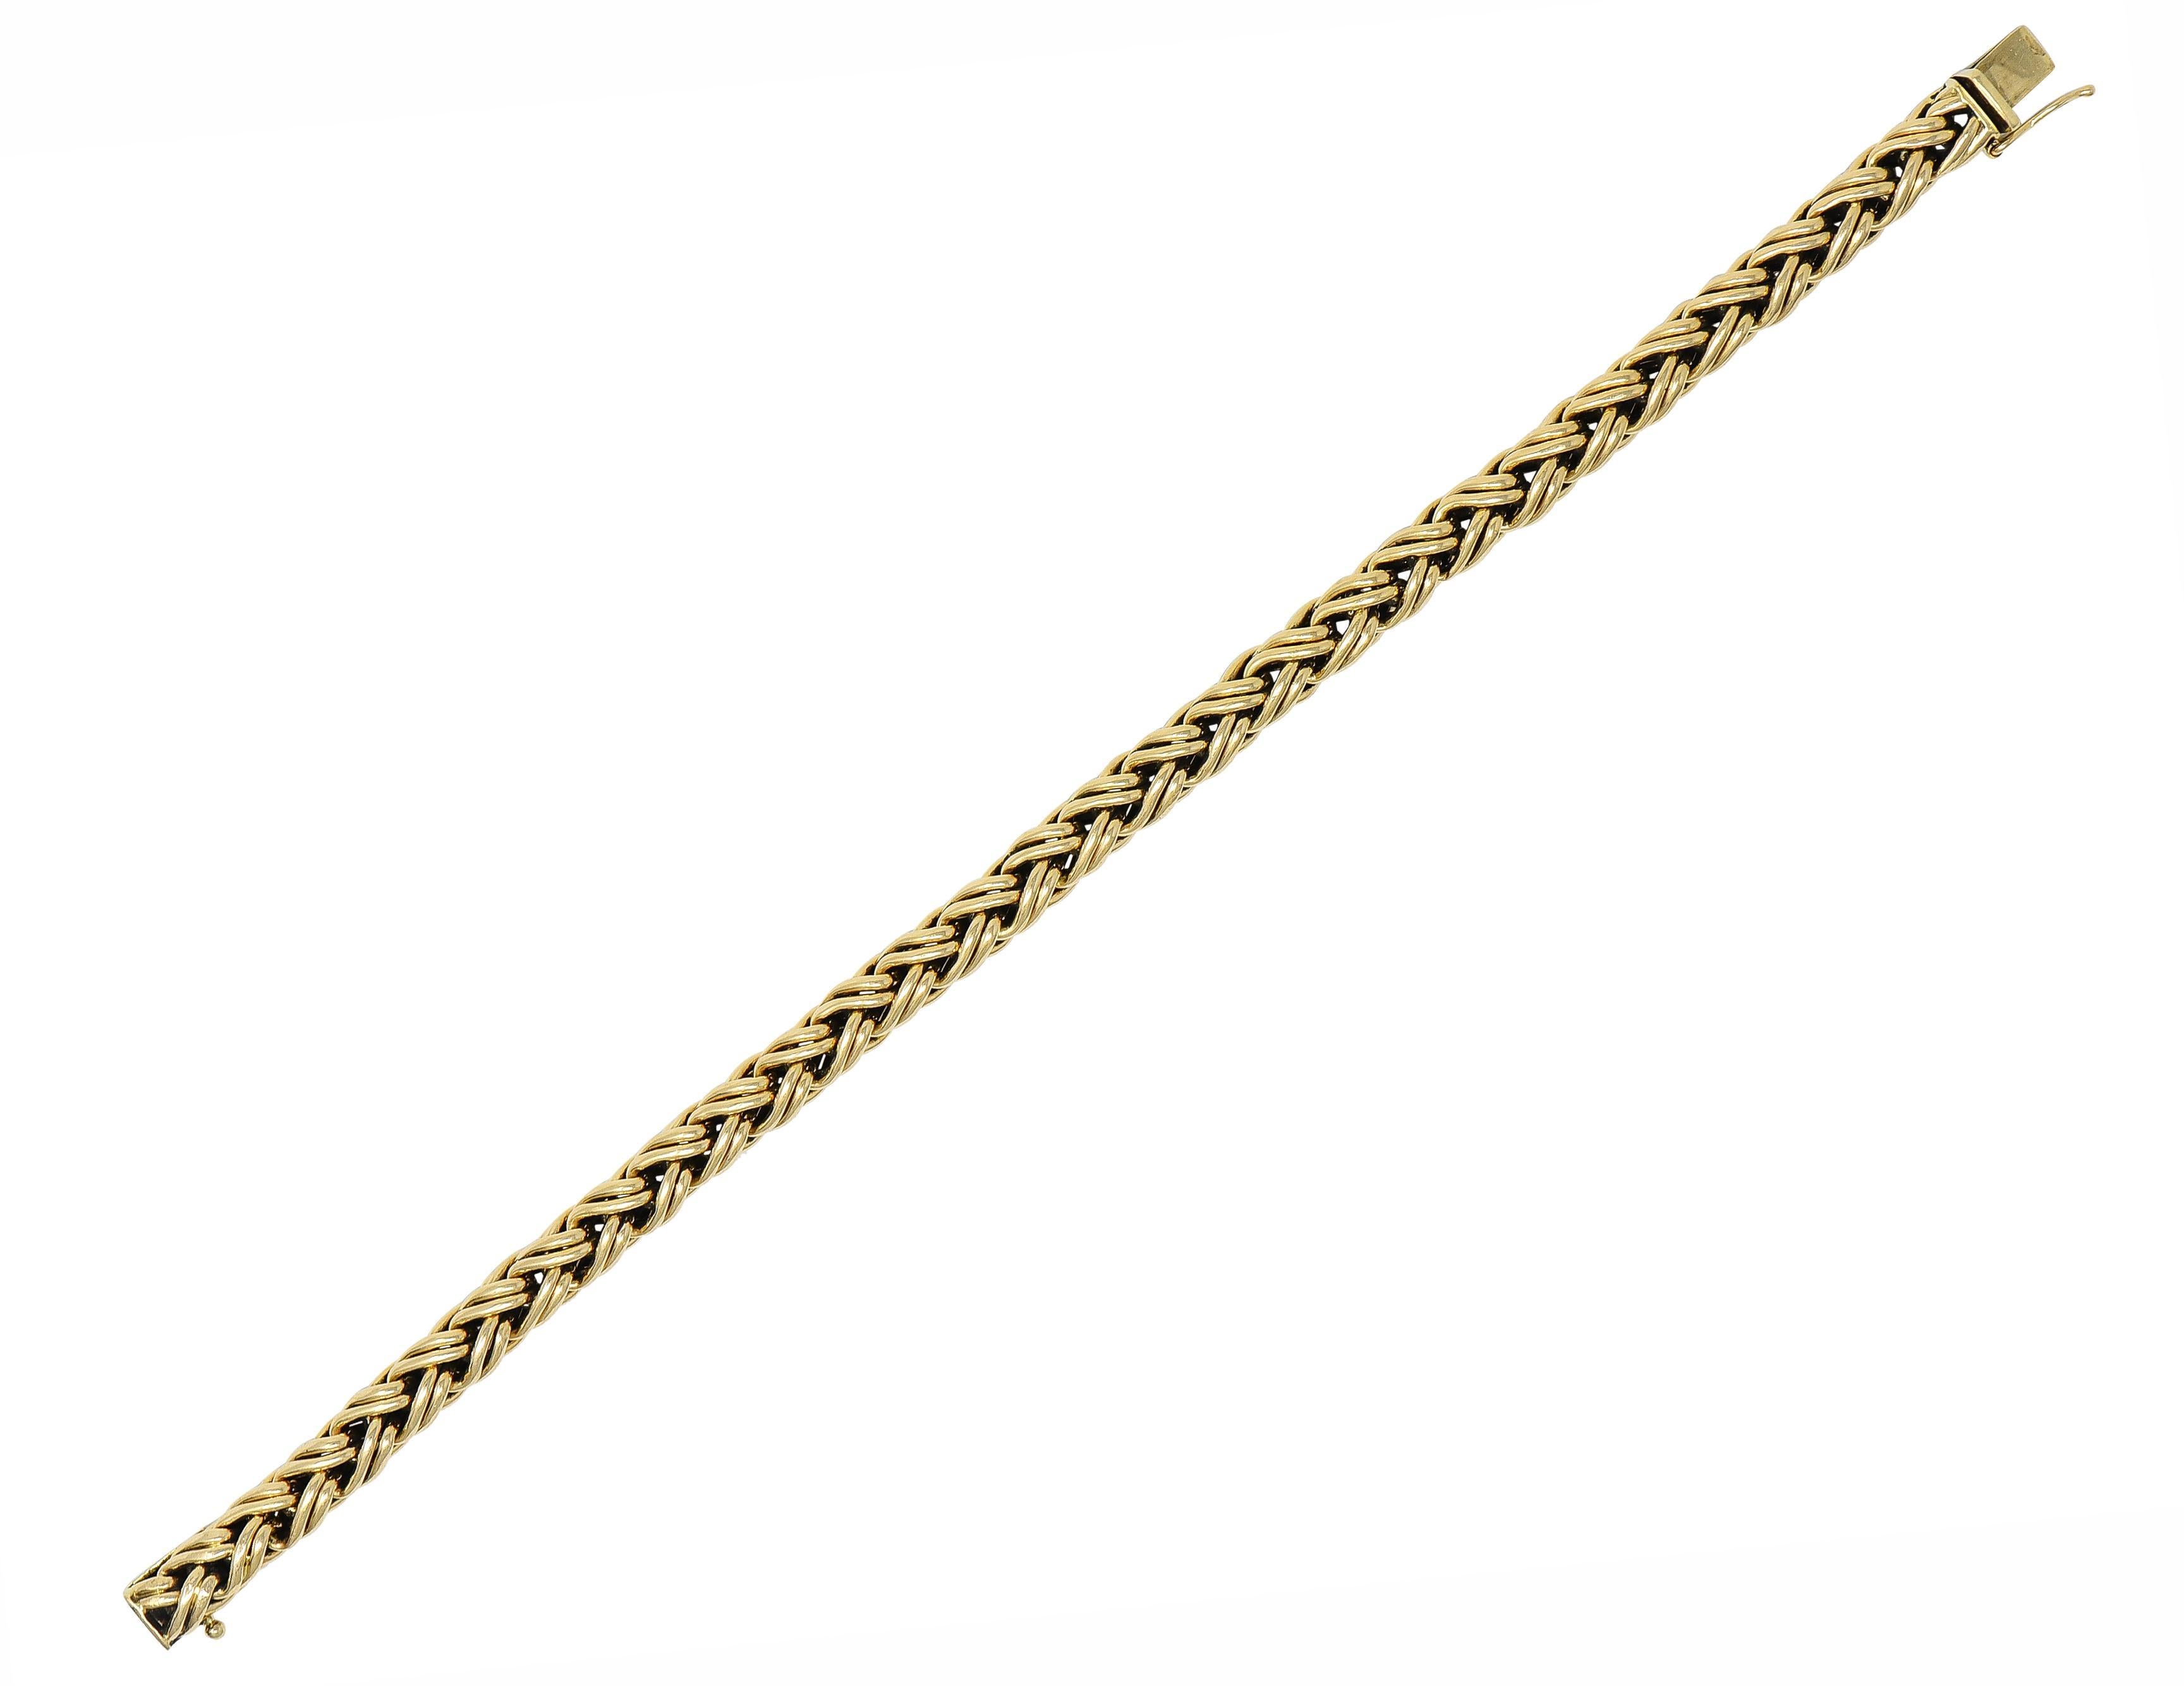 Designed as a uniform Russian weave chain 
Comprised of meshed weave motif links
With high polish finish
Completed by a concealed clasp closure
With figure eight safety
Stamped for 14 karat gold
Fully signed Tiffany & Co.
Circa: 1990's
Width: 1/4